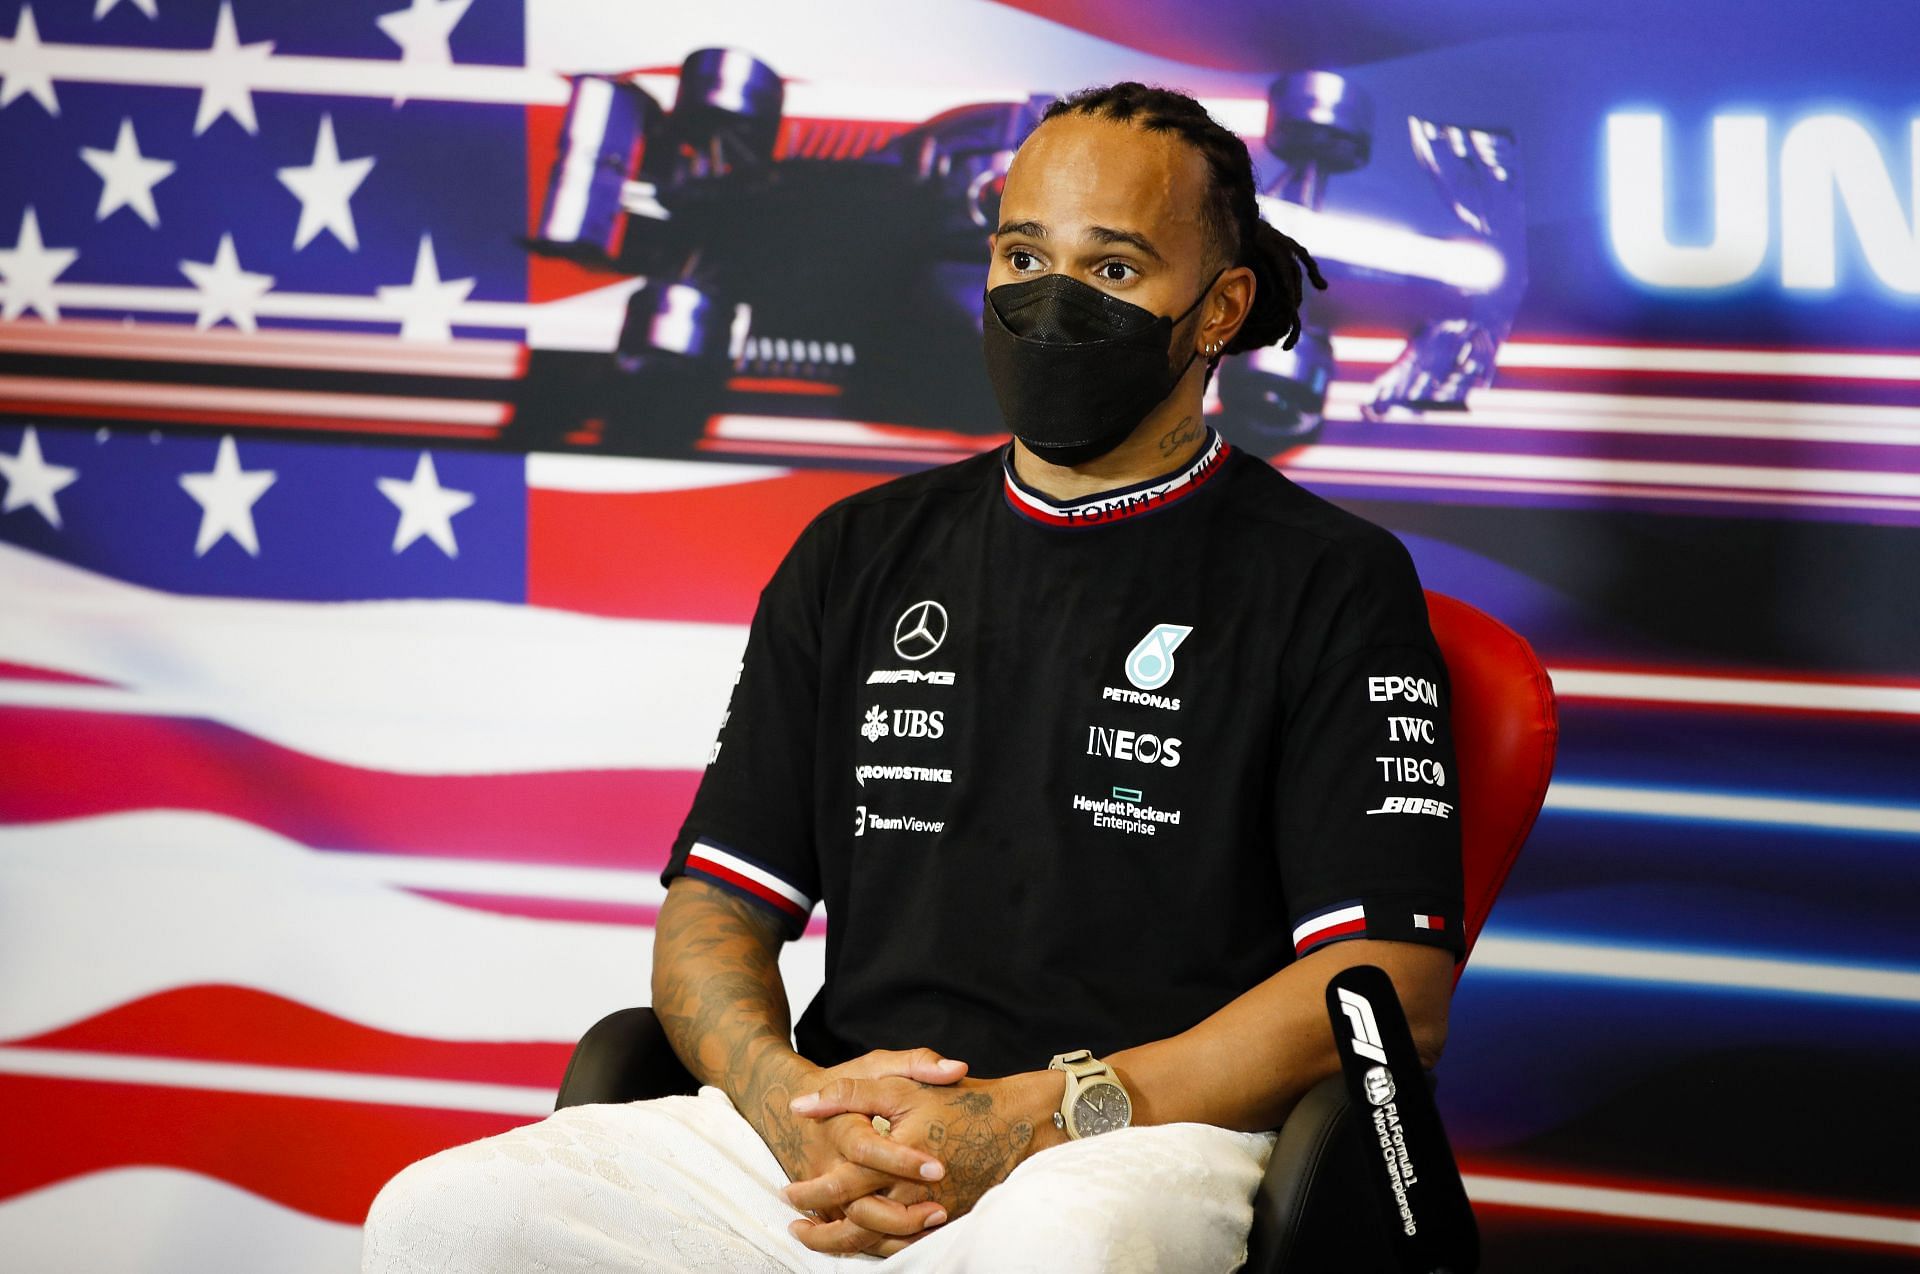 Second-placed Lewis Hamilton talks in the press conference after the 2021 USGP in Austin, Texas. (Photo by Zak Mauger - Pool/Getty Images)